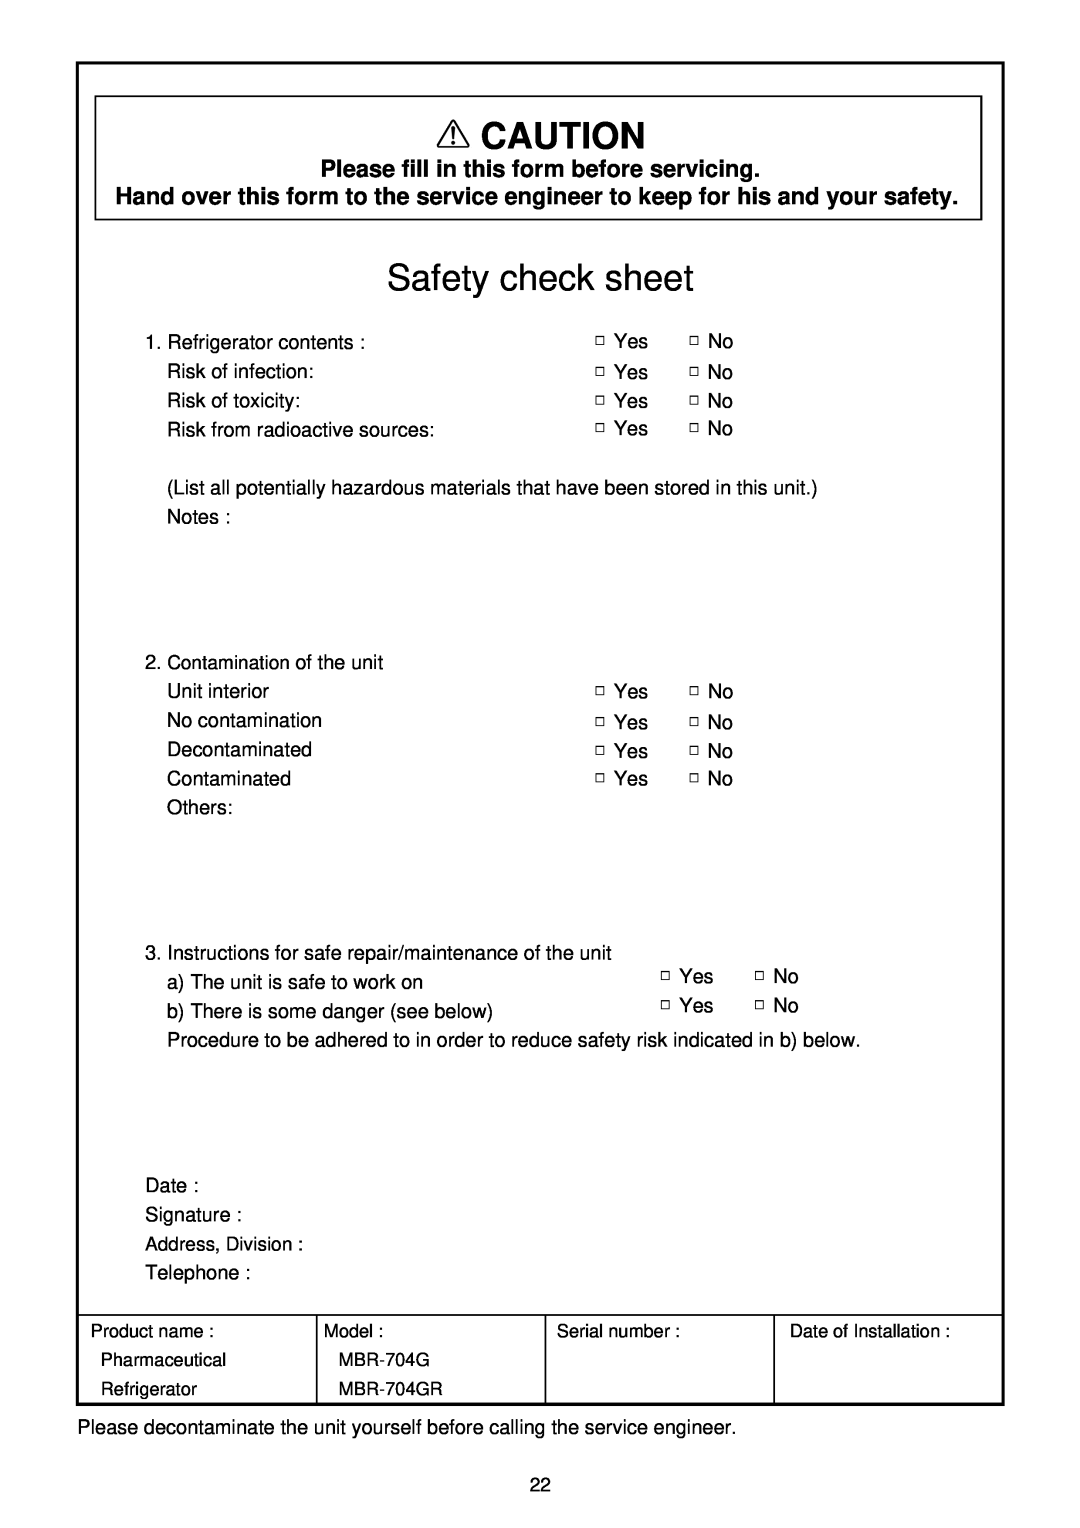 Sanyo MBR-704GR instruction manual Safety check sheet, Please fill in this form before servicing 